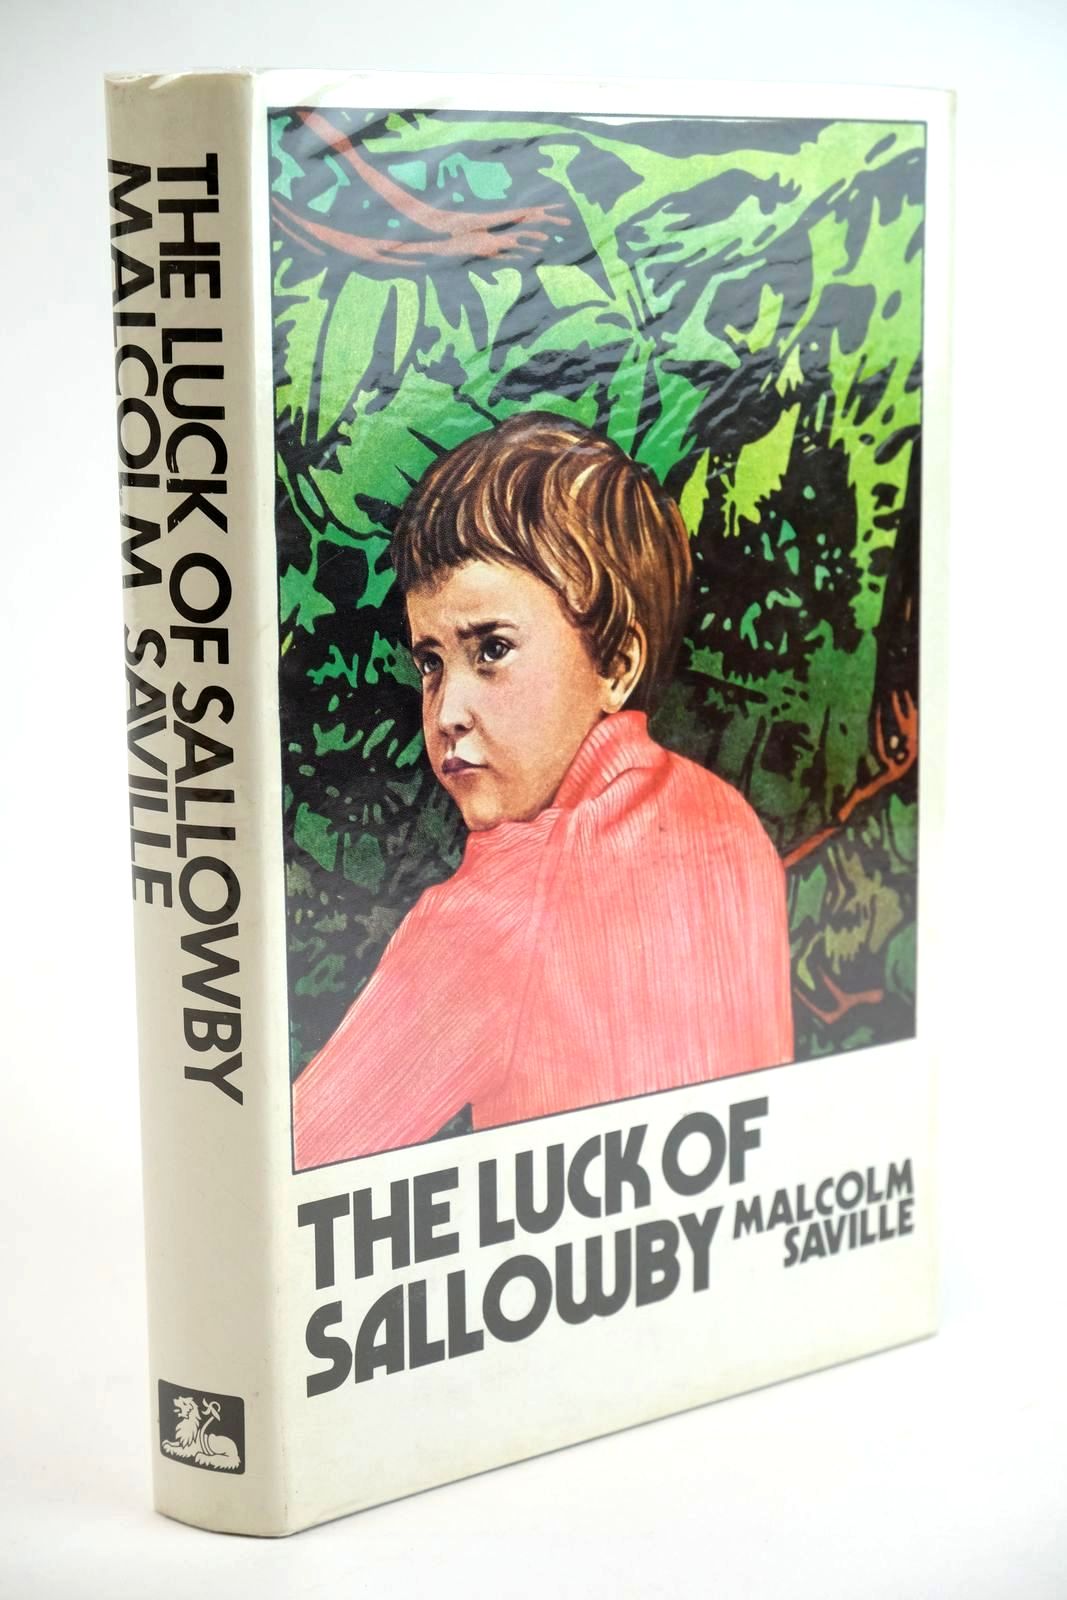 Photo of THE LUCK OF SALLOWBY written by Saville, Malcolm illustrated by Reeves, Tilden published by White Lion Publishers Limited (STOCK CODE: 1323372)  for sale by Stella & Rose's Books